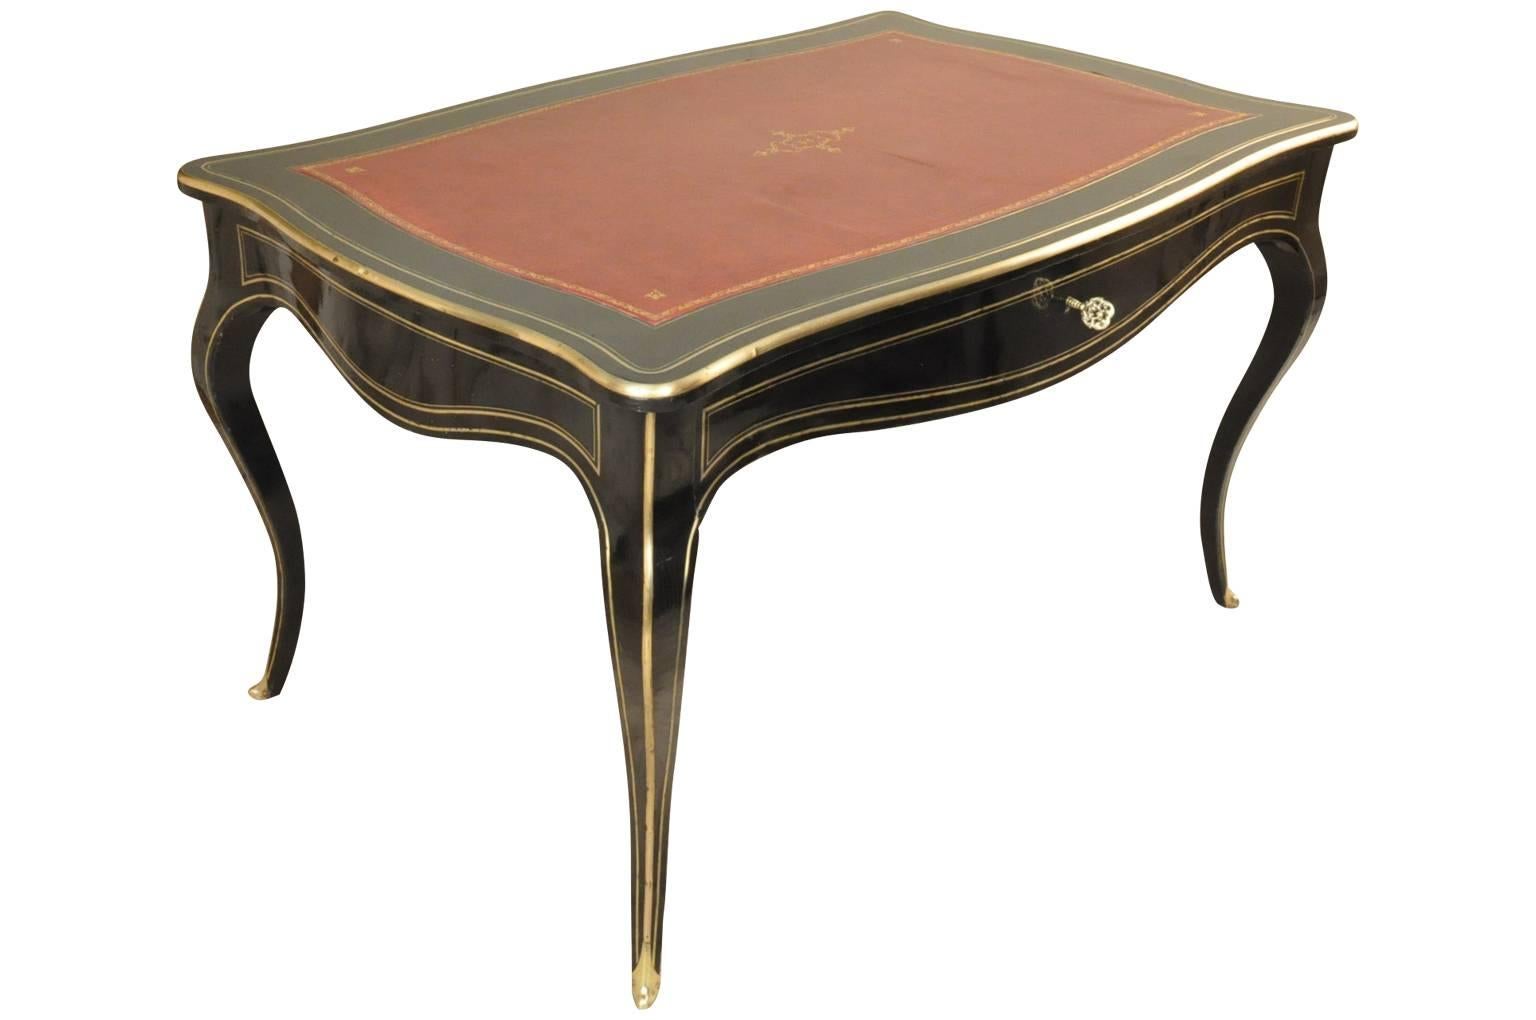 A stunning and very fine 19th century French Napoleon III bureau plat - writing desk. Masterfully constructed in ebonized or lacquered wood, with bronze mounts. The top is inset with a gilt tooled leather writing surface and molded edges. The apron